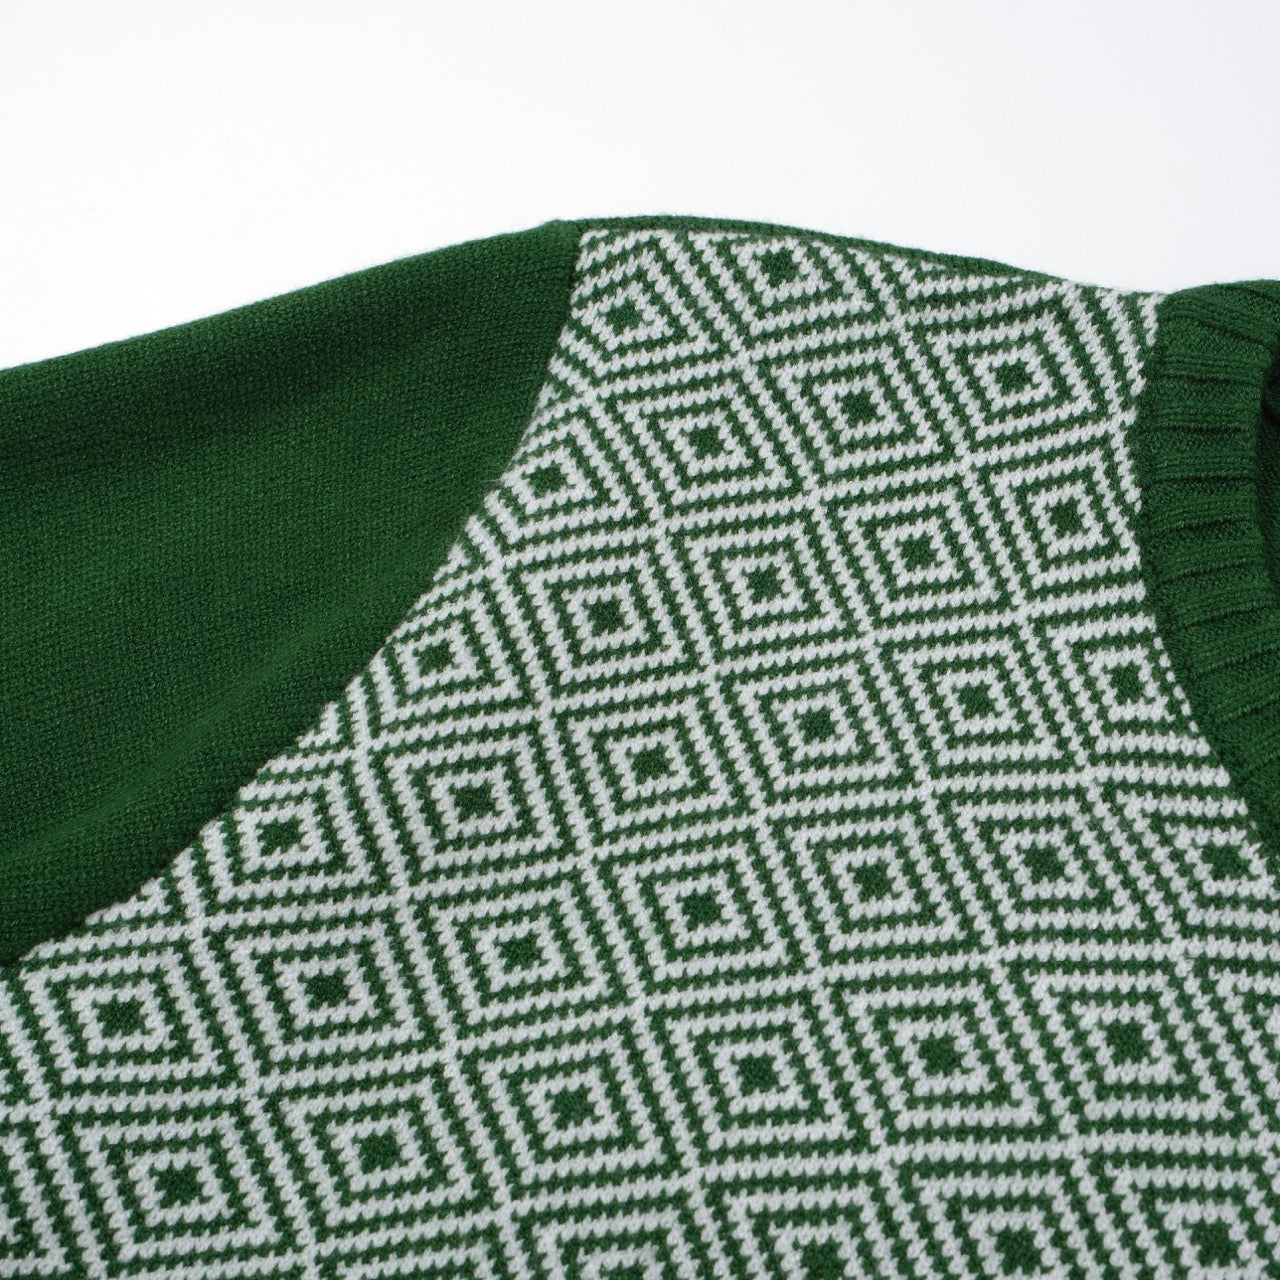 Men's Retro Style Green Knitted Long Sleeve Sweater